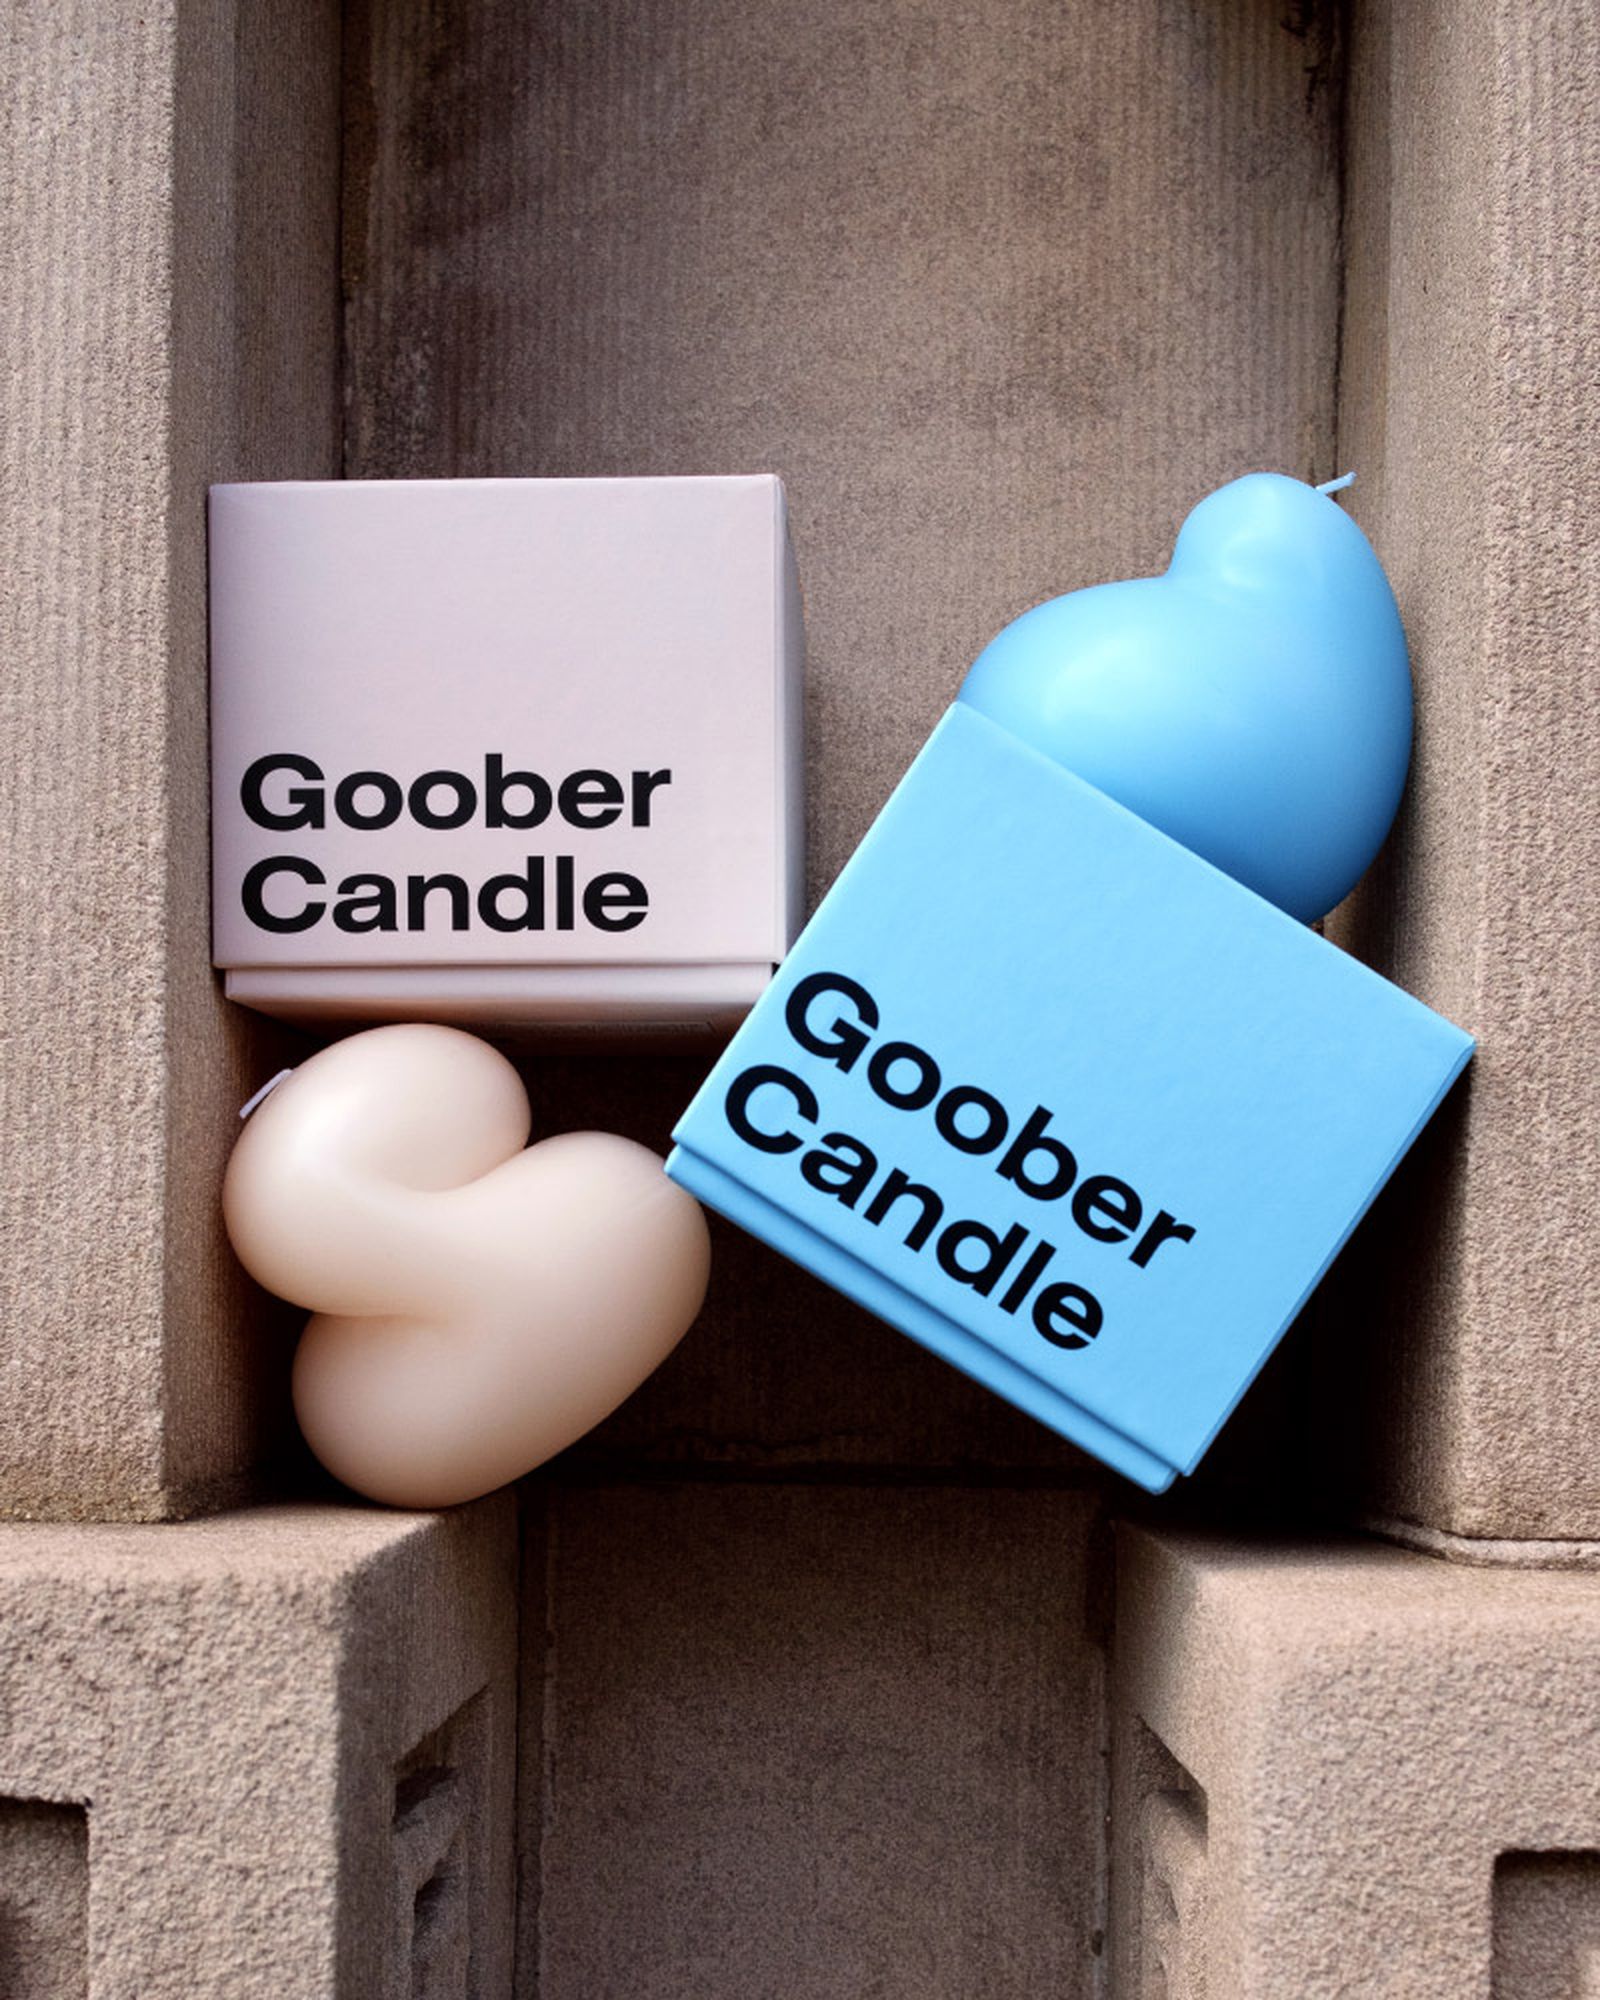 talbot yoon goober candle obsession areaware blobject candles